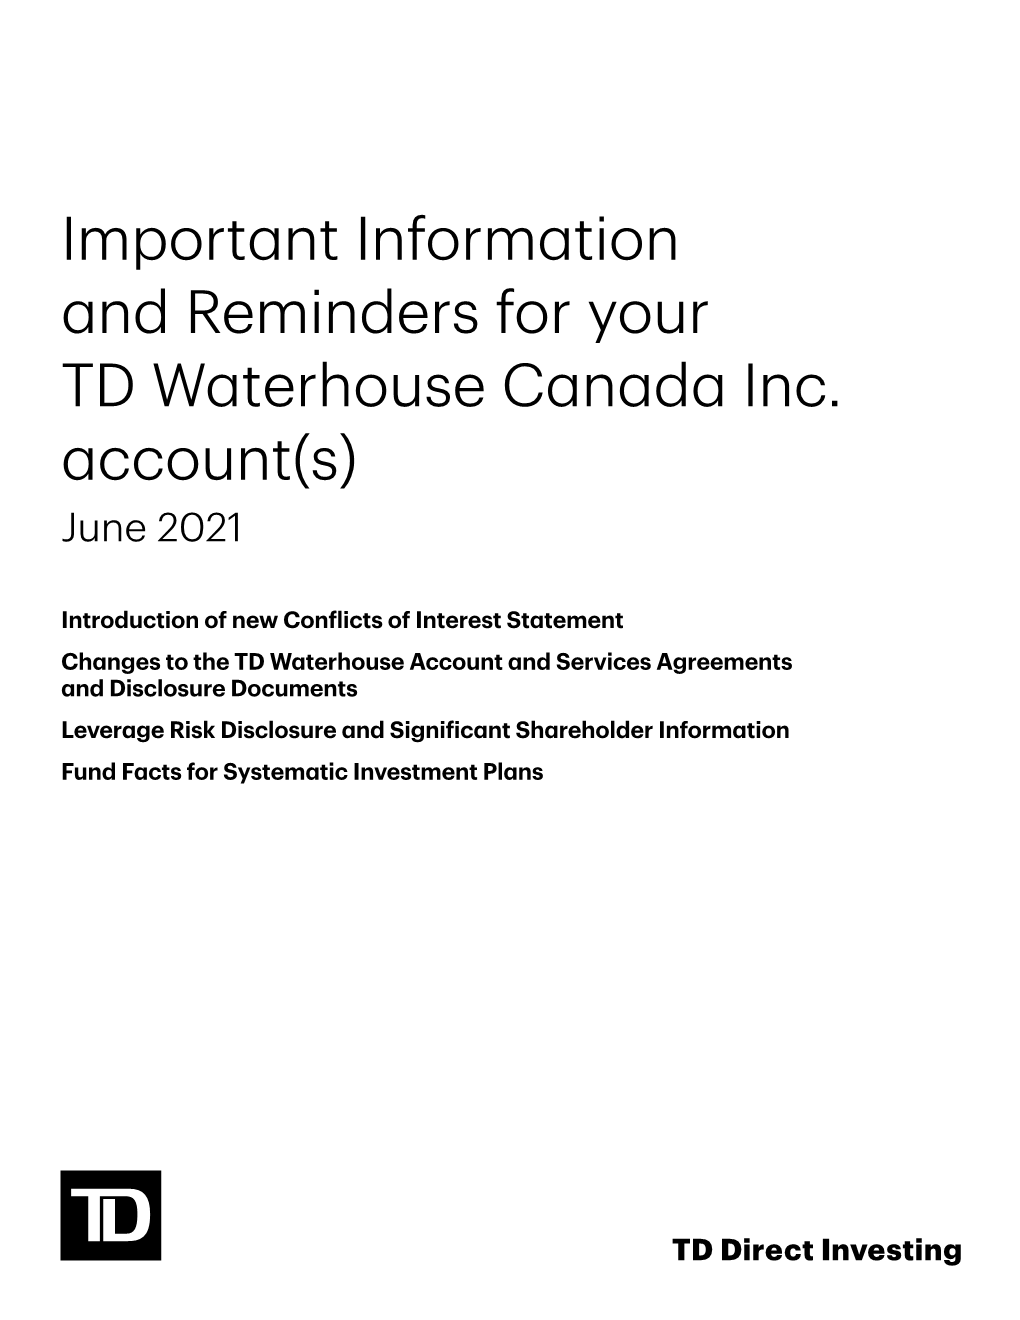 Important Information and Reminders for Your TD Waterhouse Canada Inc